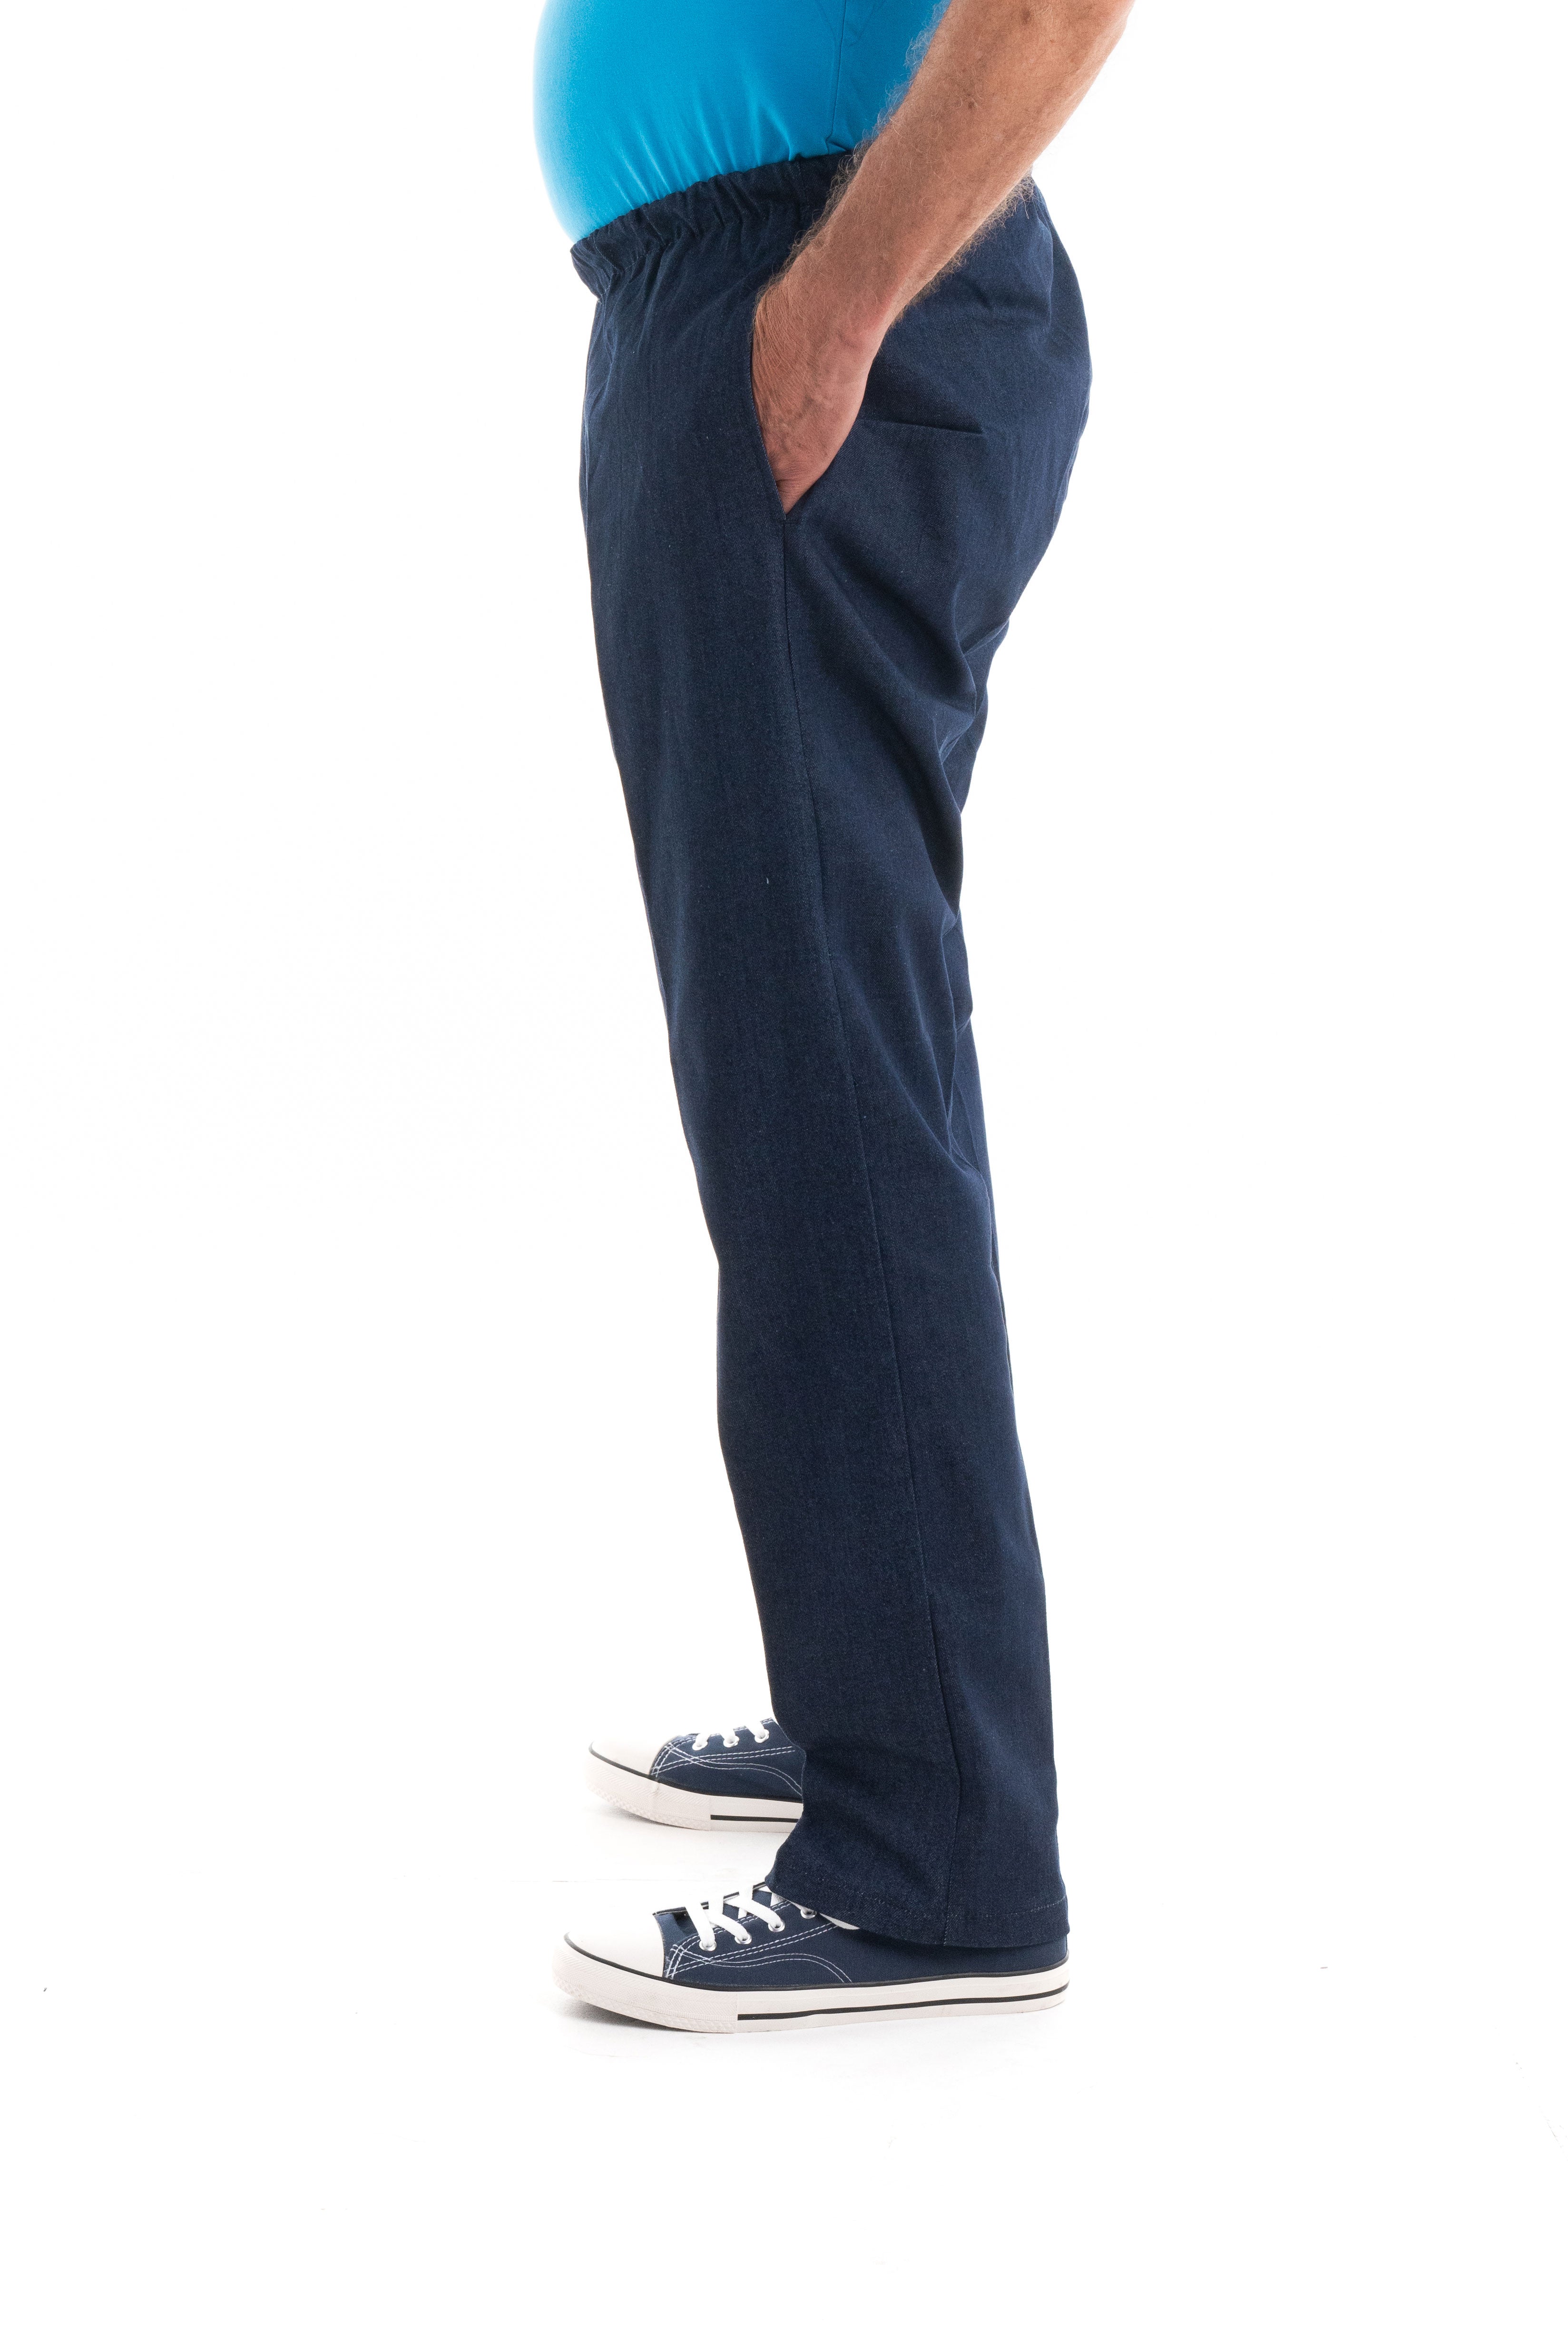 Men's Elastic Waist Pull On Stretch Jeans - SAVE 20% VAT Relief